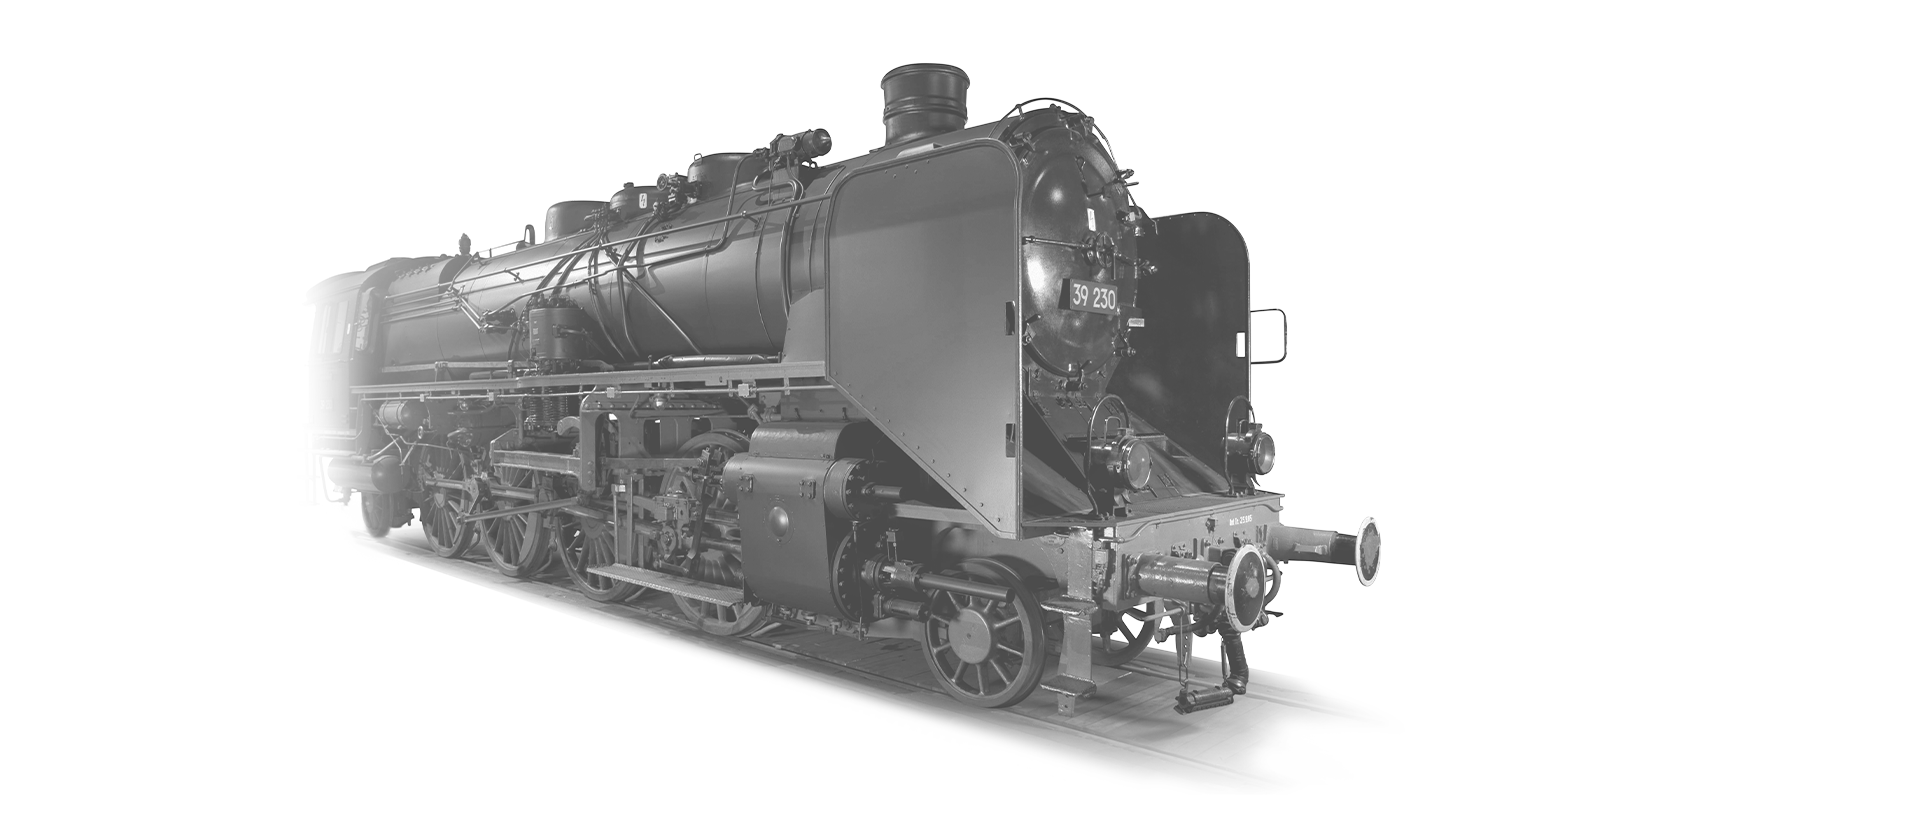 The locomotive 39-230 is coming towards the camera in black and white